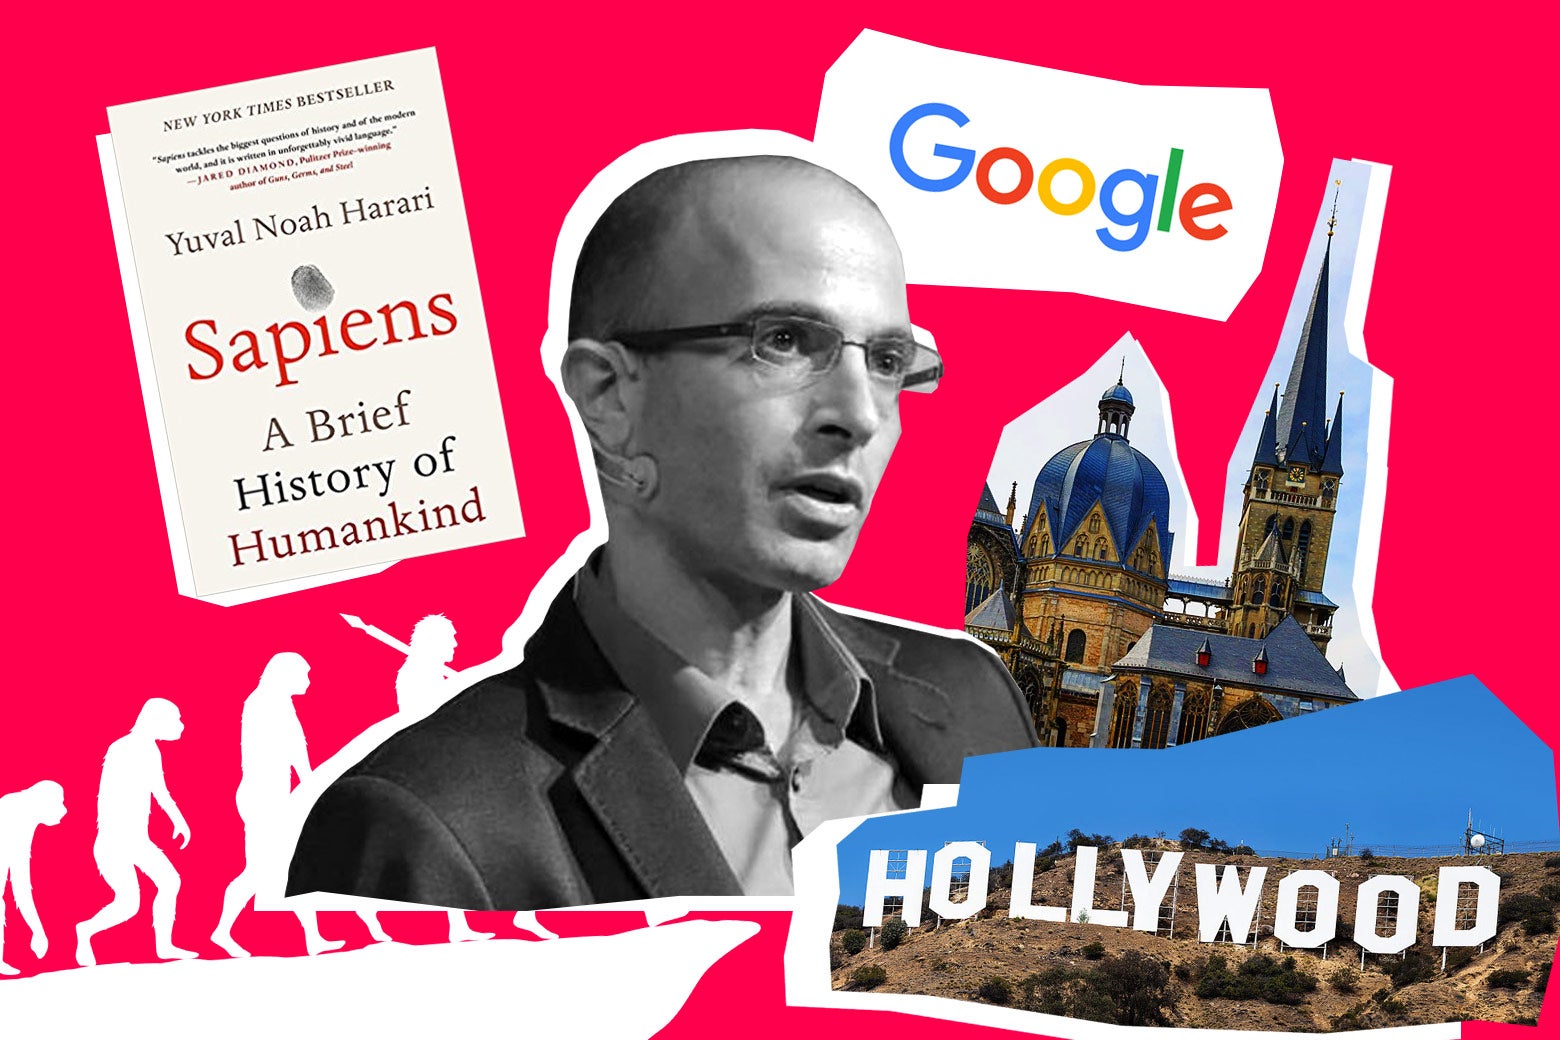 Yuval Noah Harari surrounded by a copy of his book Sapiens, the Google logo, the Hollywood sign, a cathedral, and the evolution of man drawing.